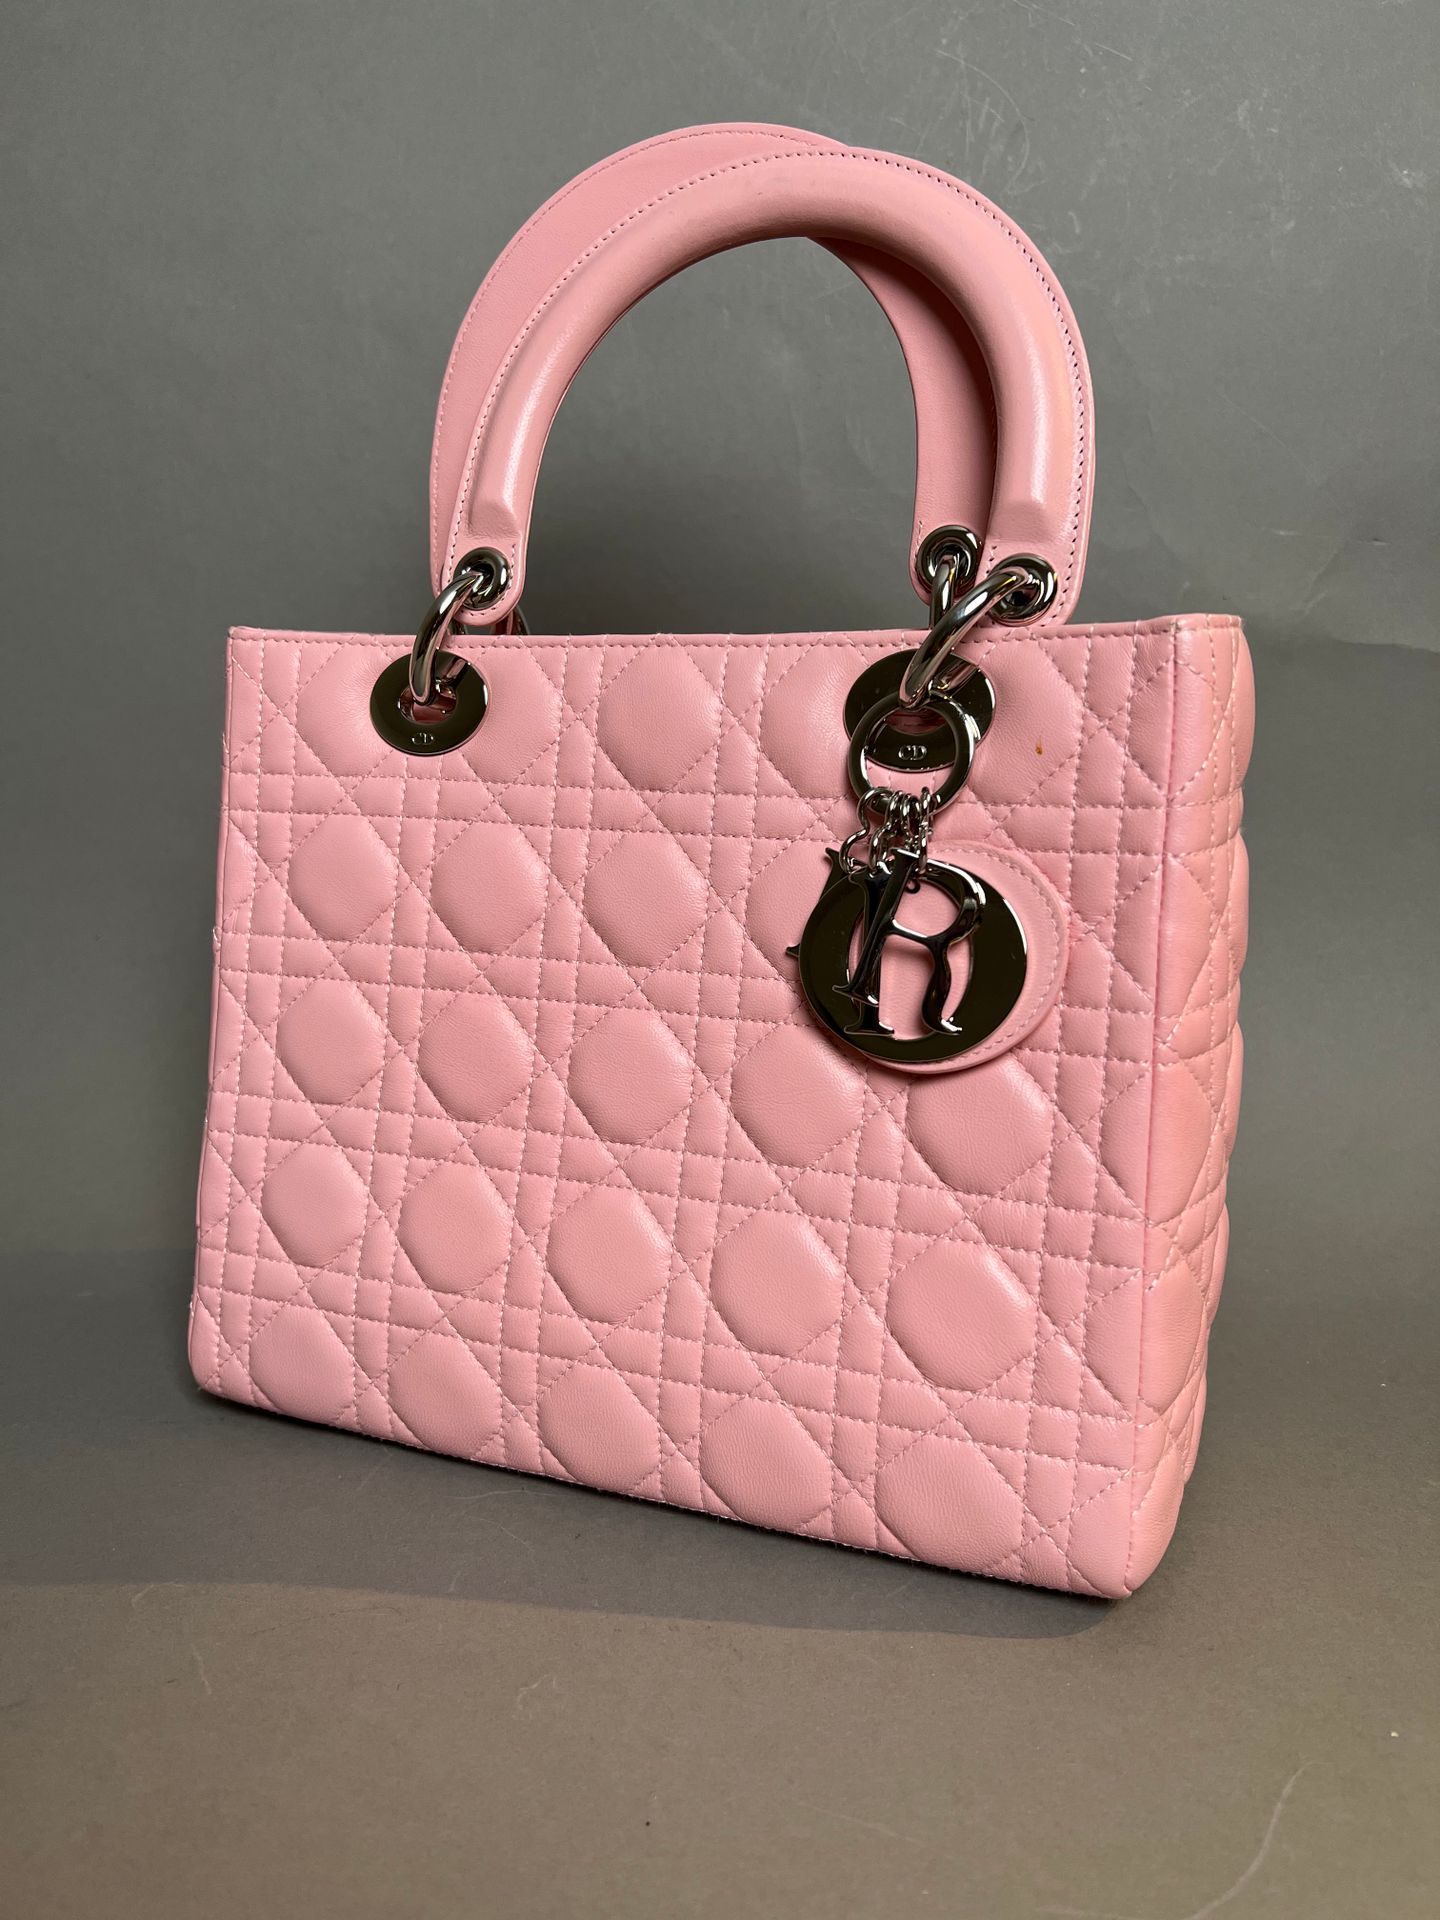 Null CHRISTIAN DIOR. Pink leather bag, "Lady Dior" model, with its silver charm &hellip;